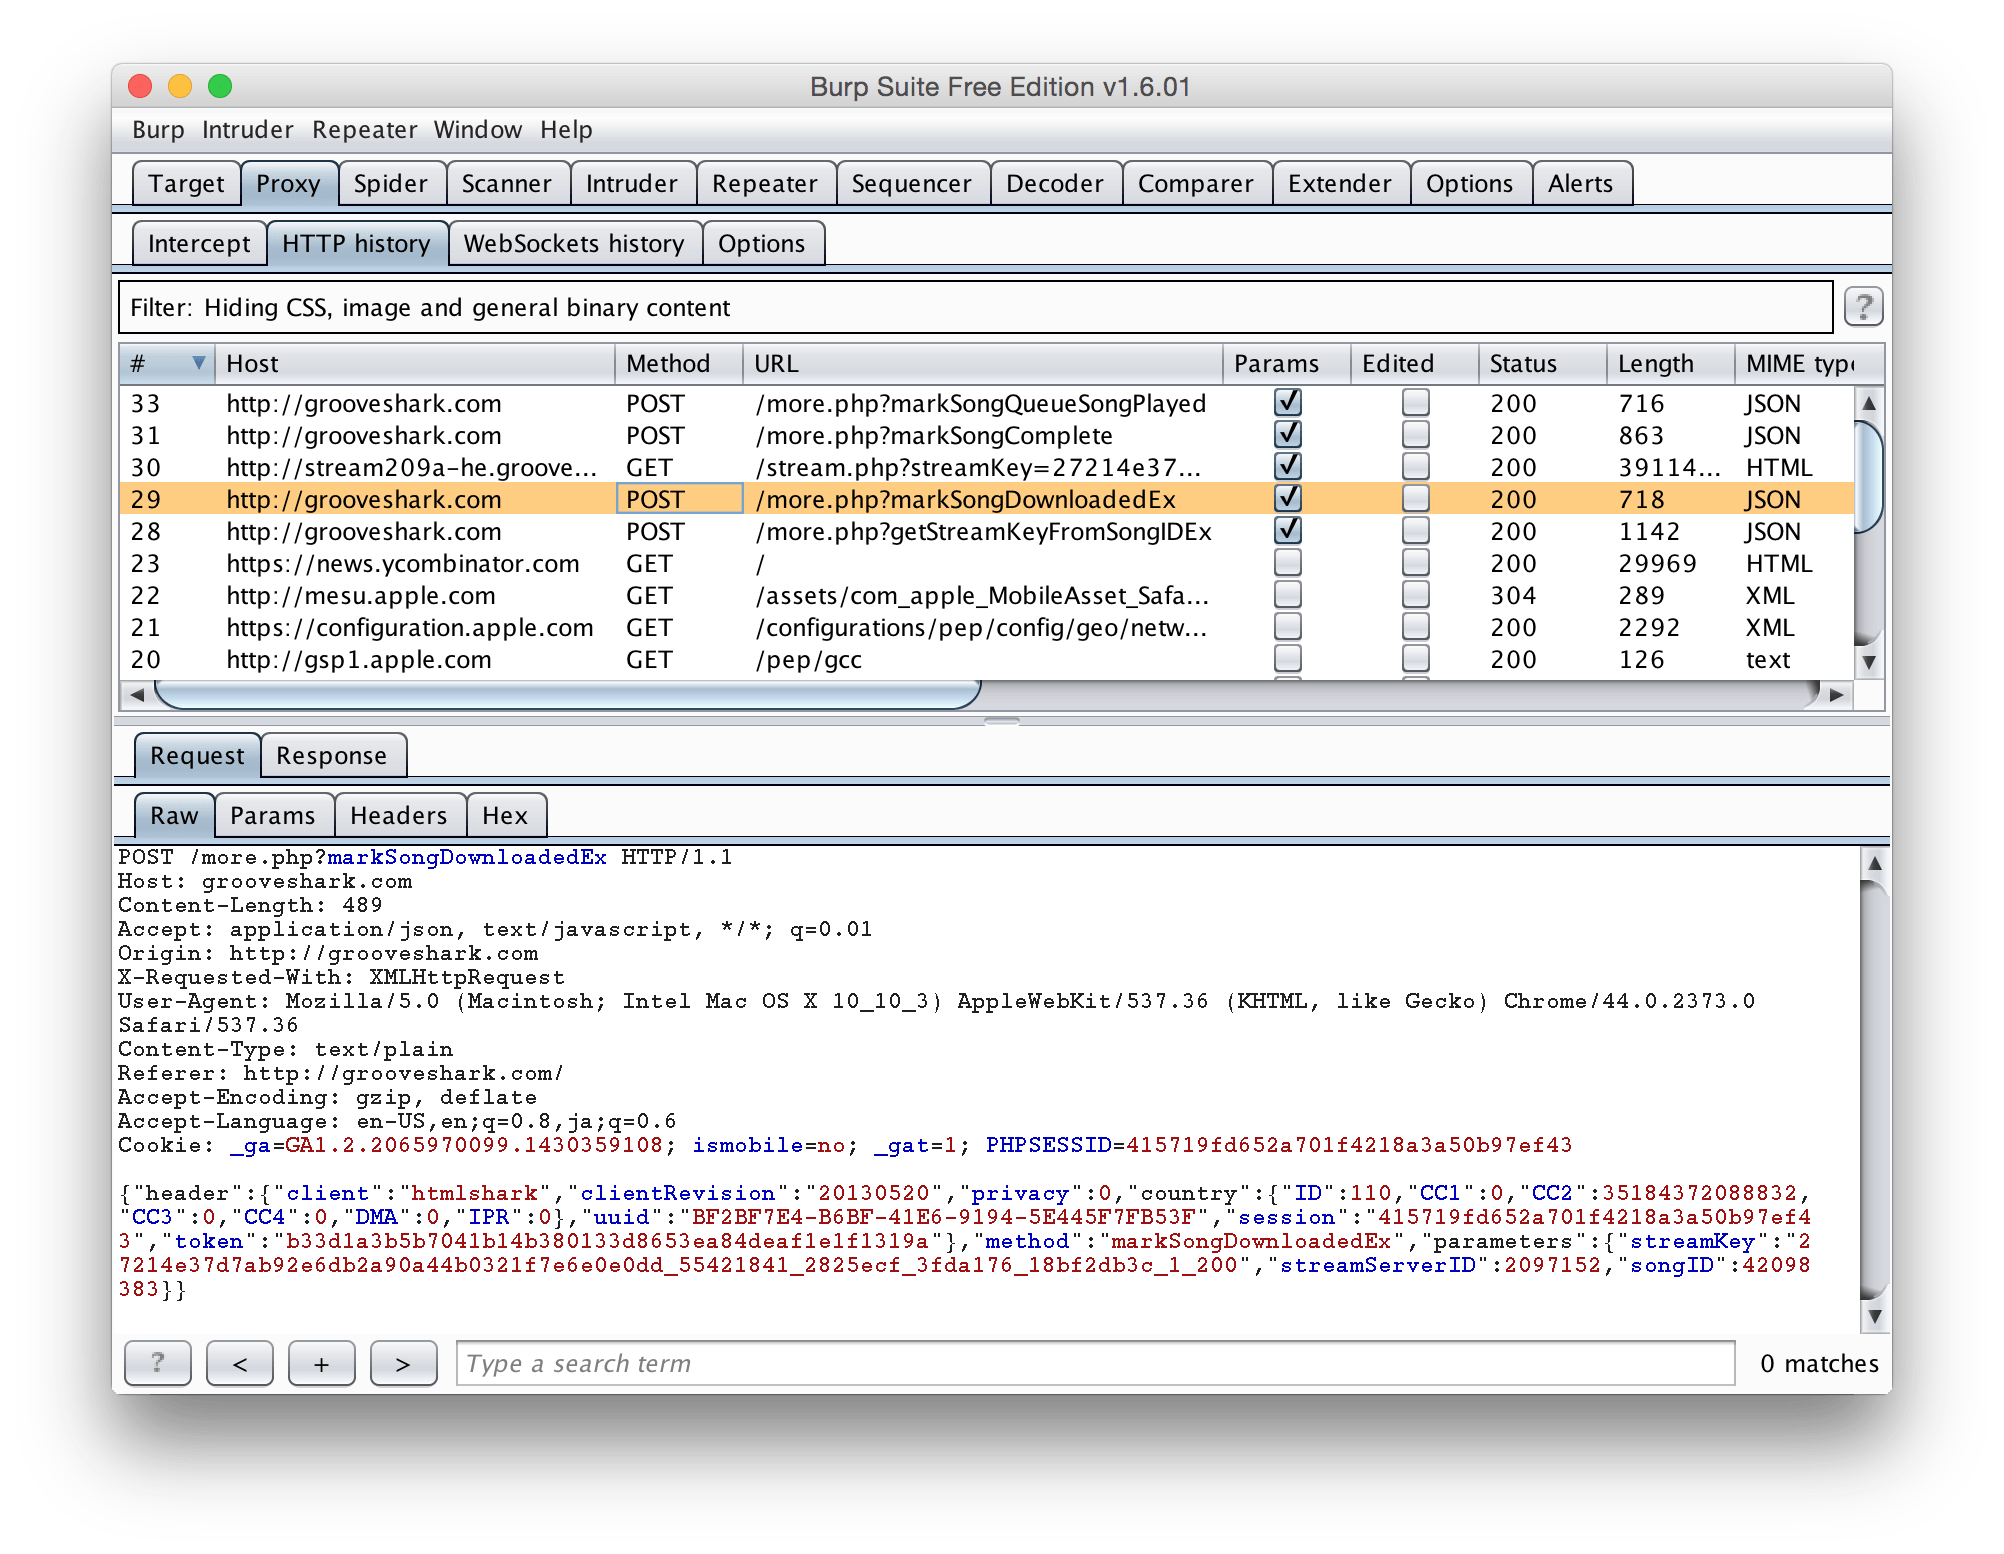 BurpSuite - HTTP History